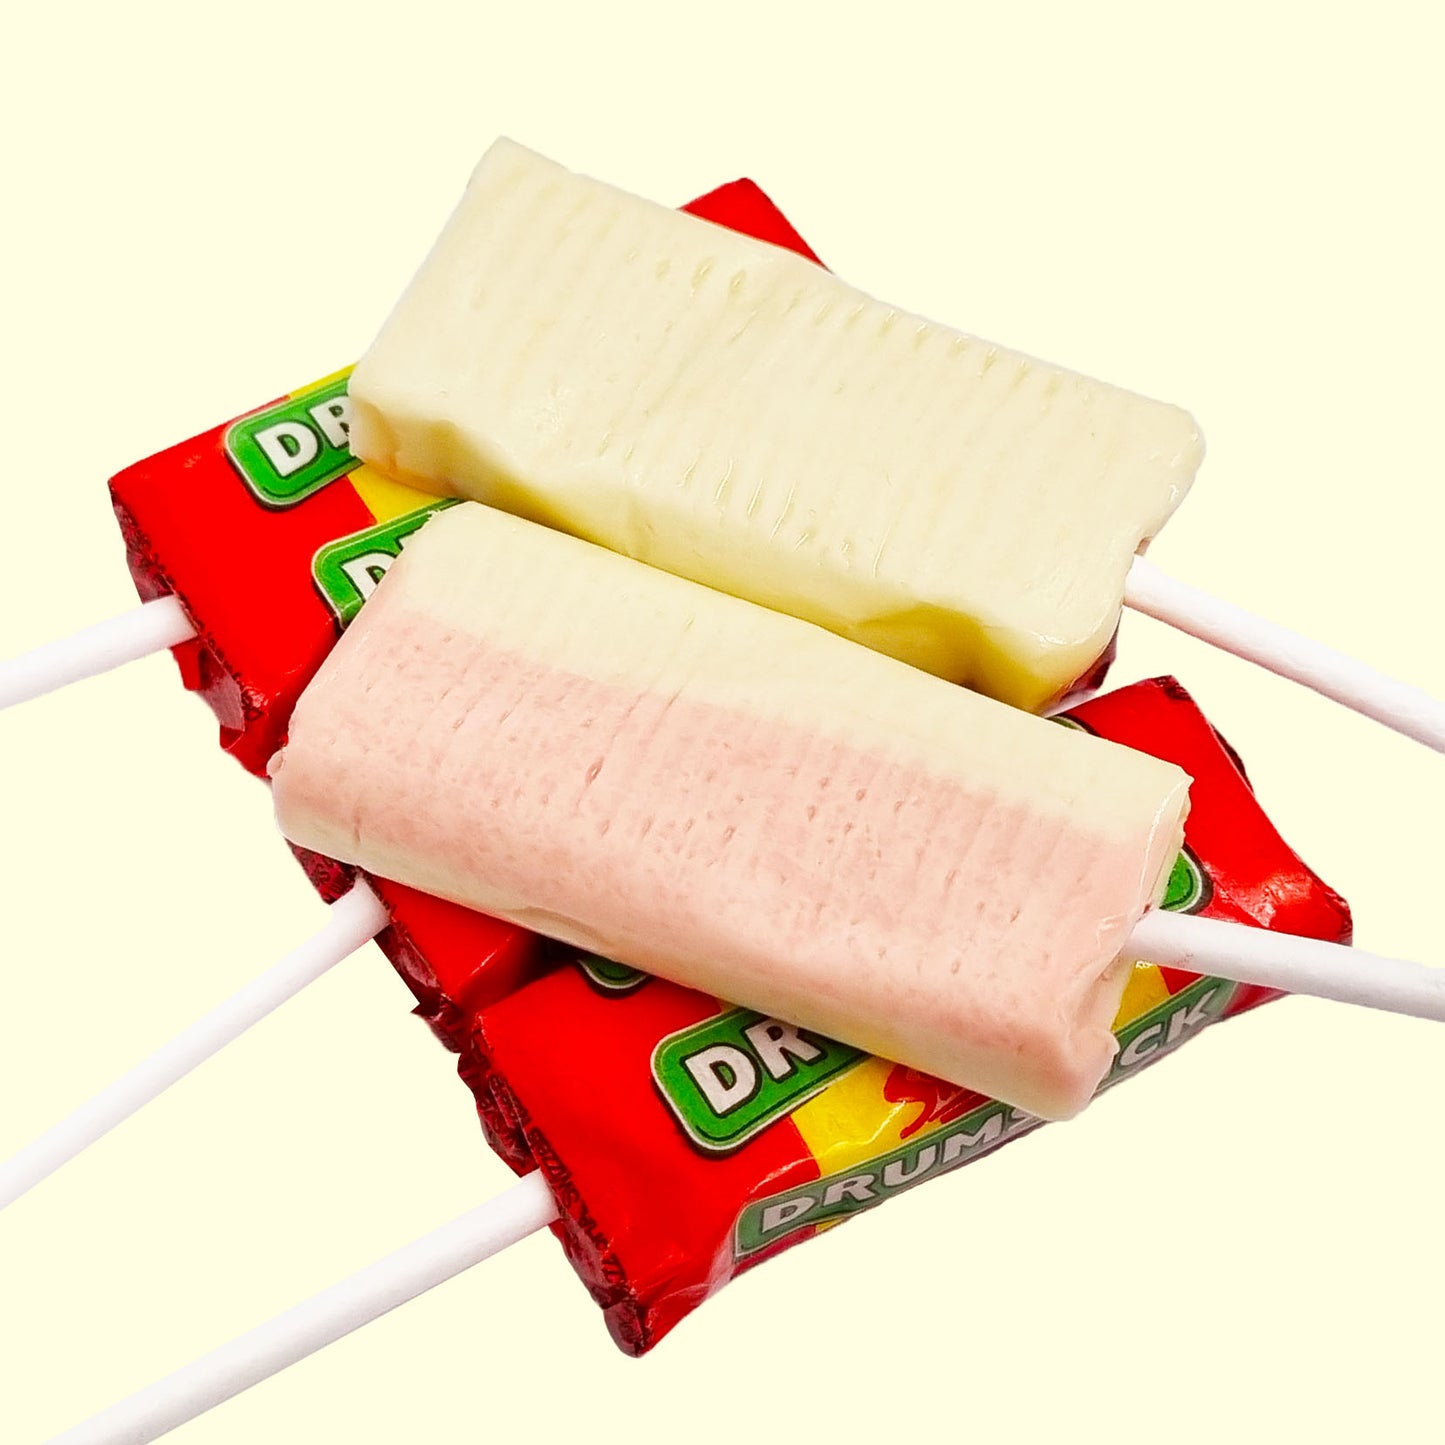 Drummerstick Sweeties Fragrance Oil | Truly Personal | Candles, Wax Melts, Soap, Bath Bombs